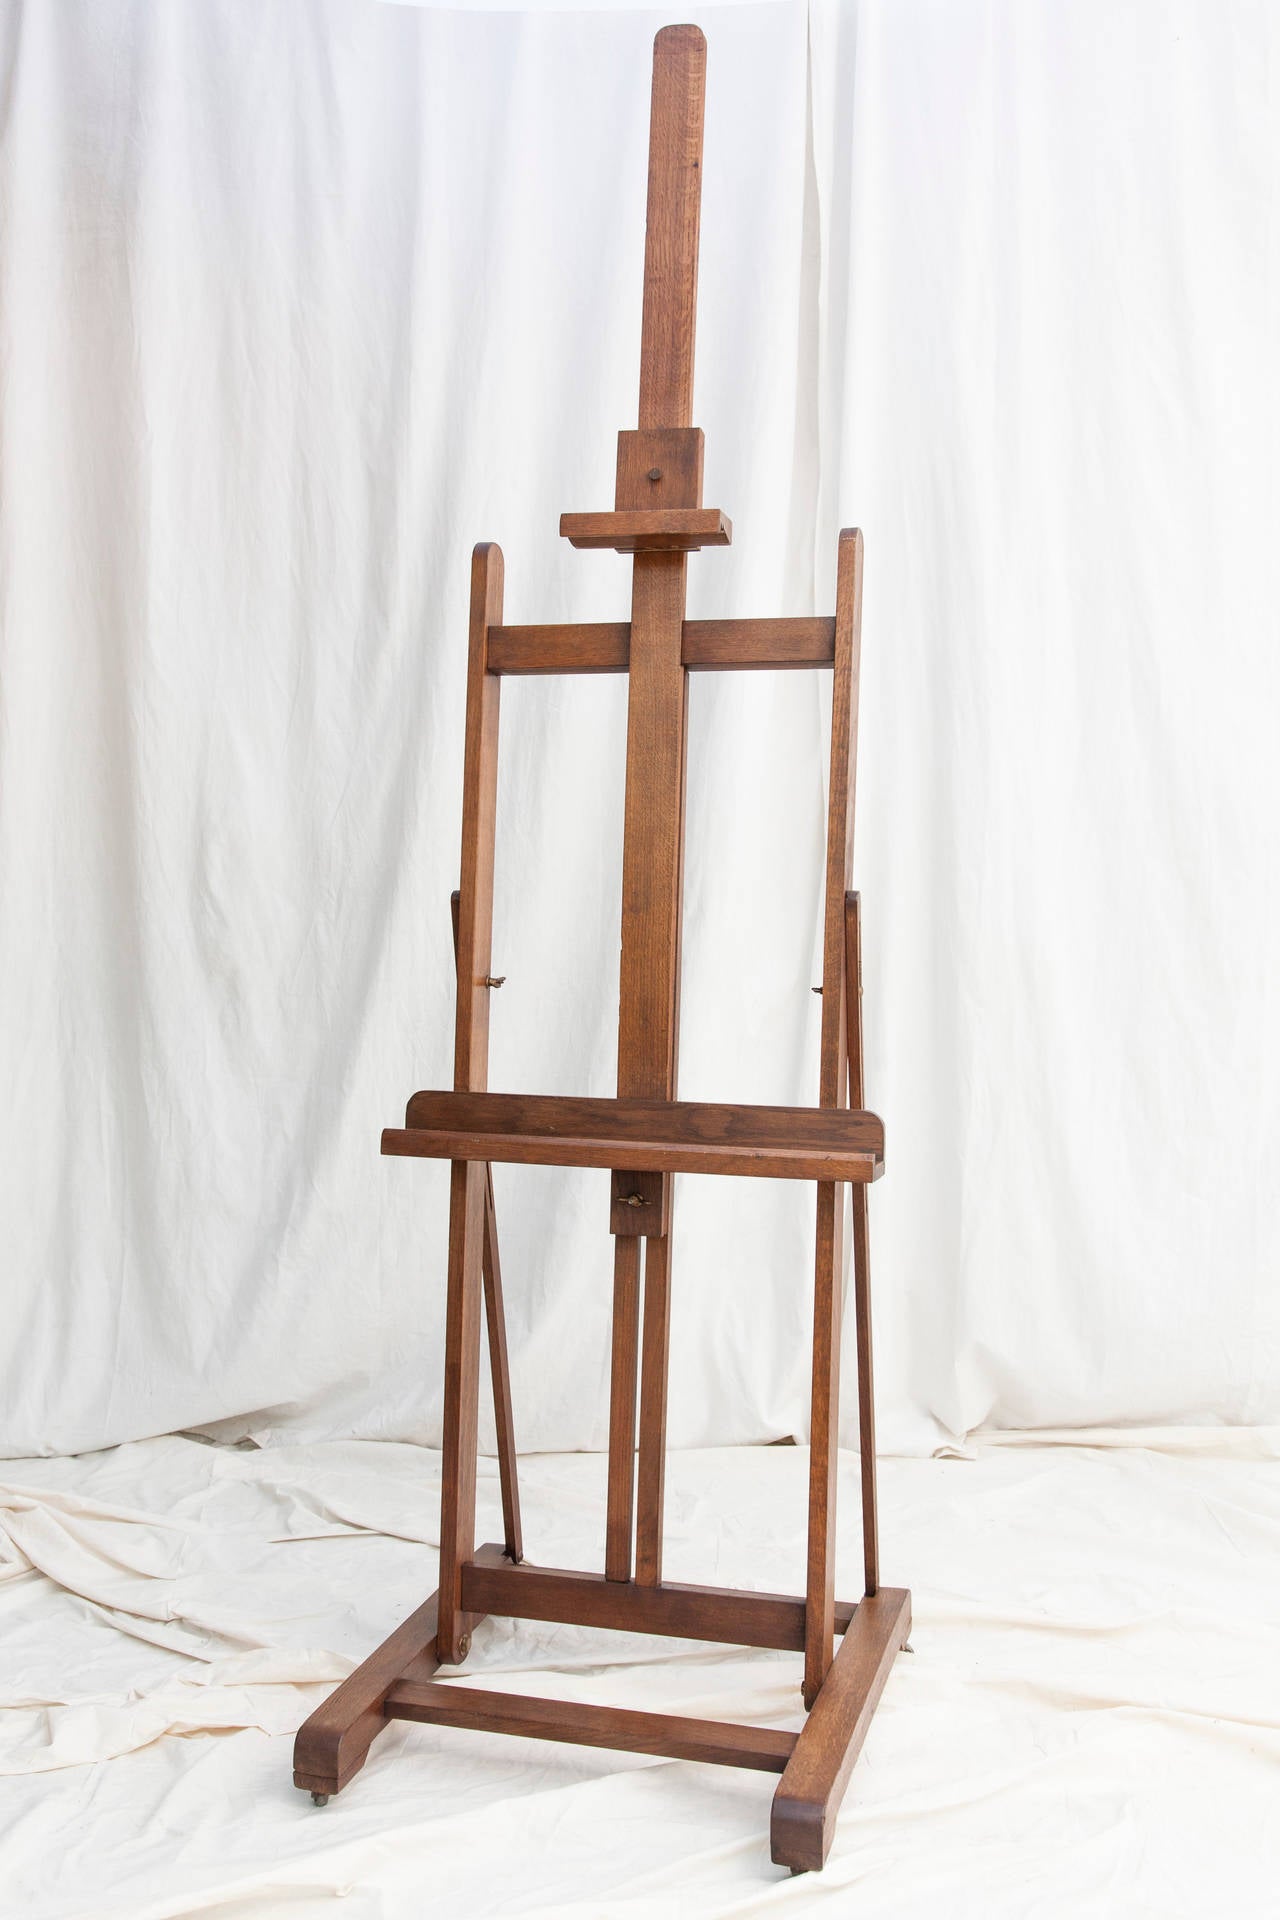 This handsome and sturdy easel would make an excellent display piece for artwork. With a 4